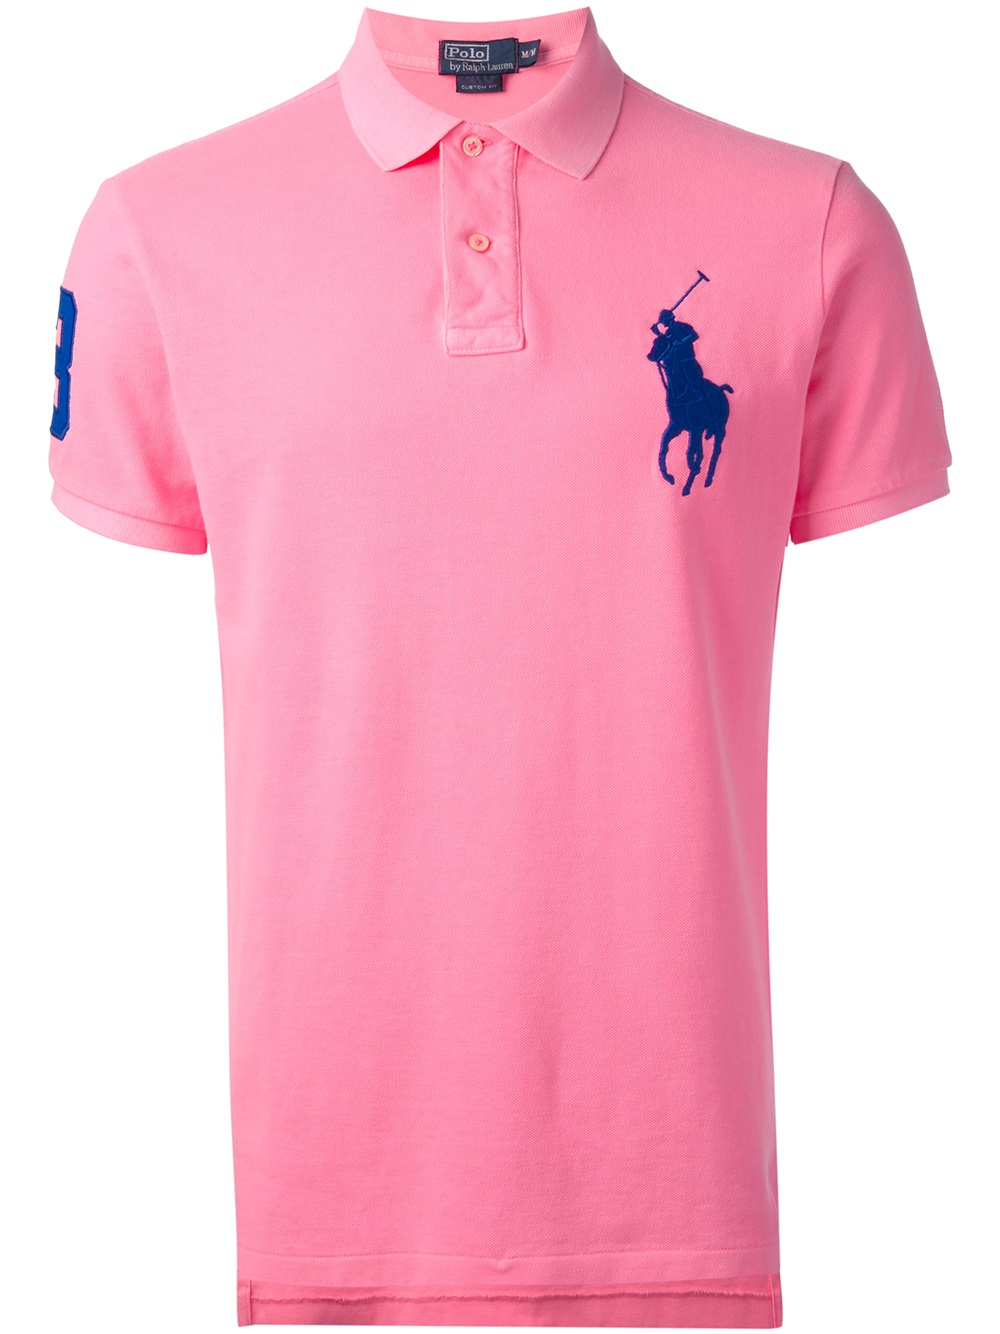 Lyst - Polo Ralph Lauren Classic Polo Shirt in Pink for Men